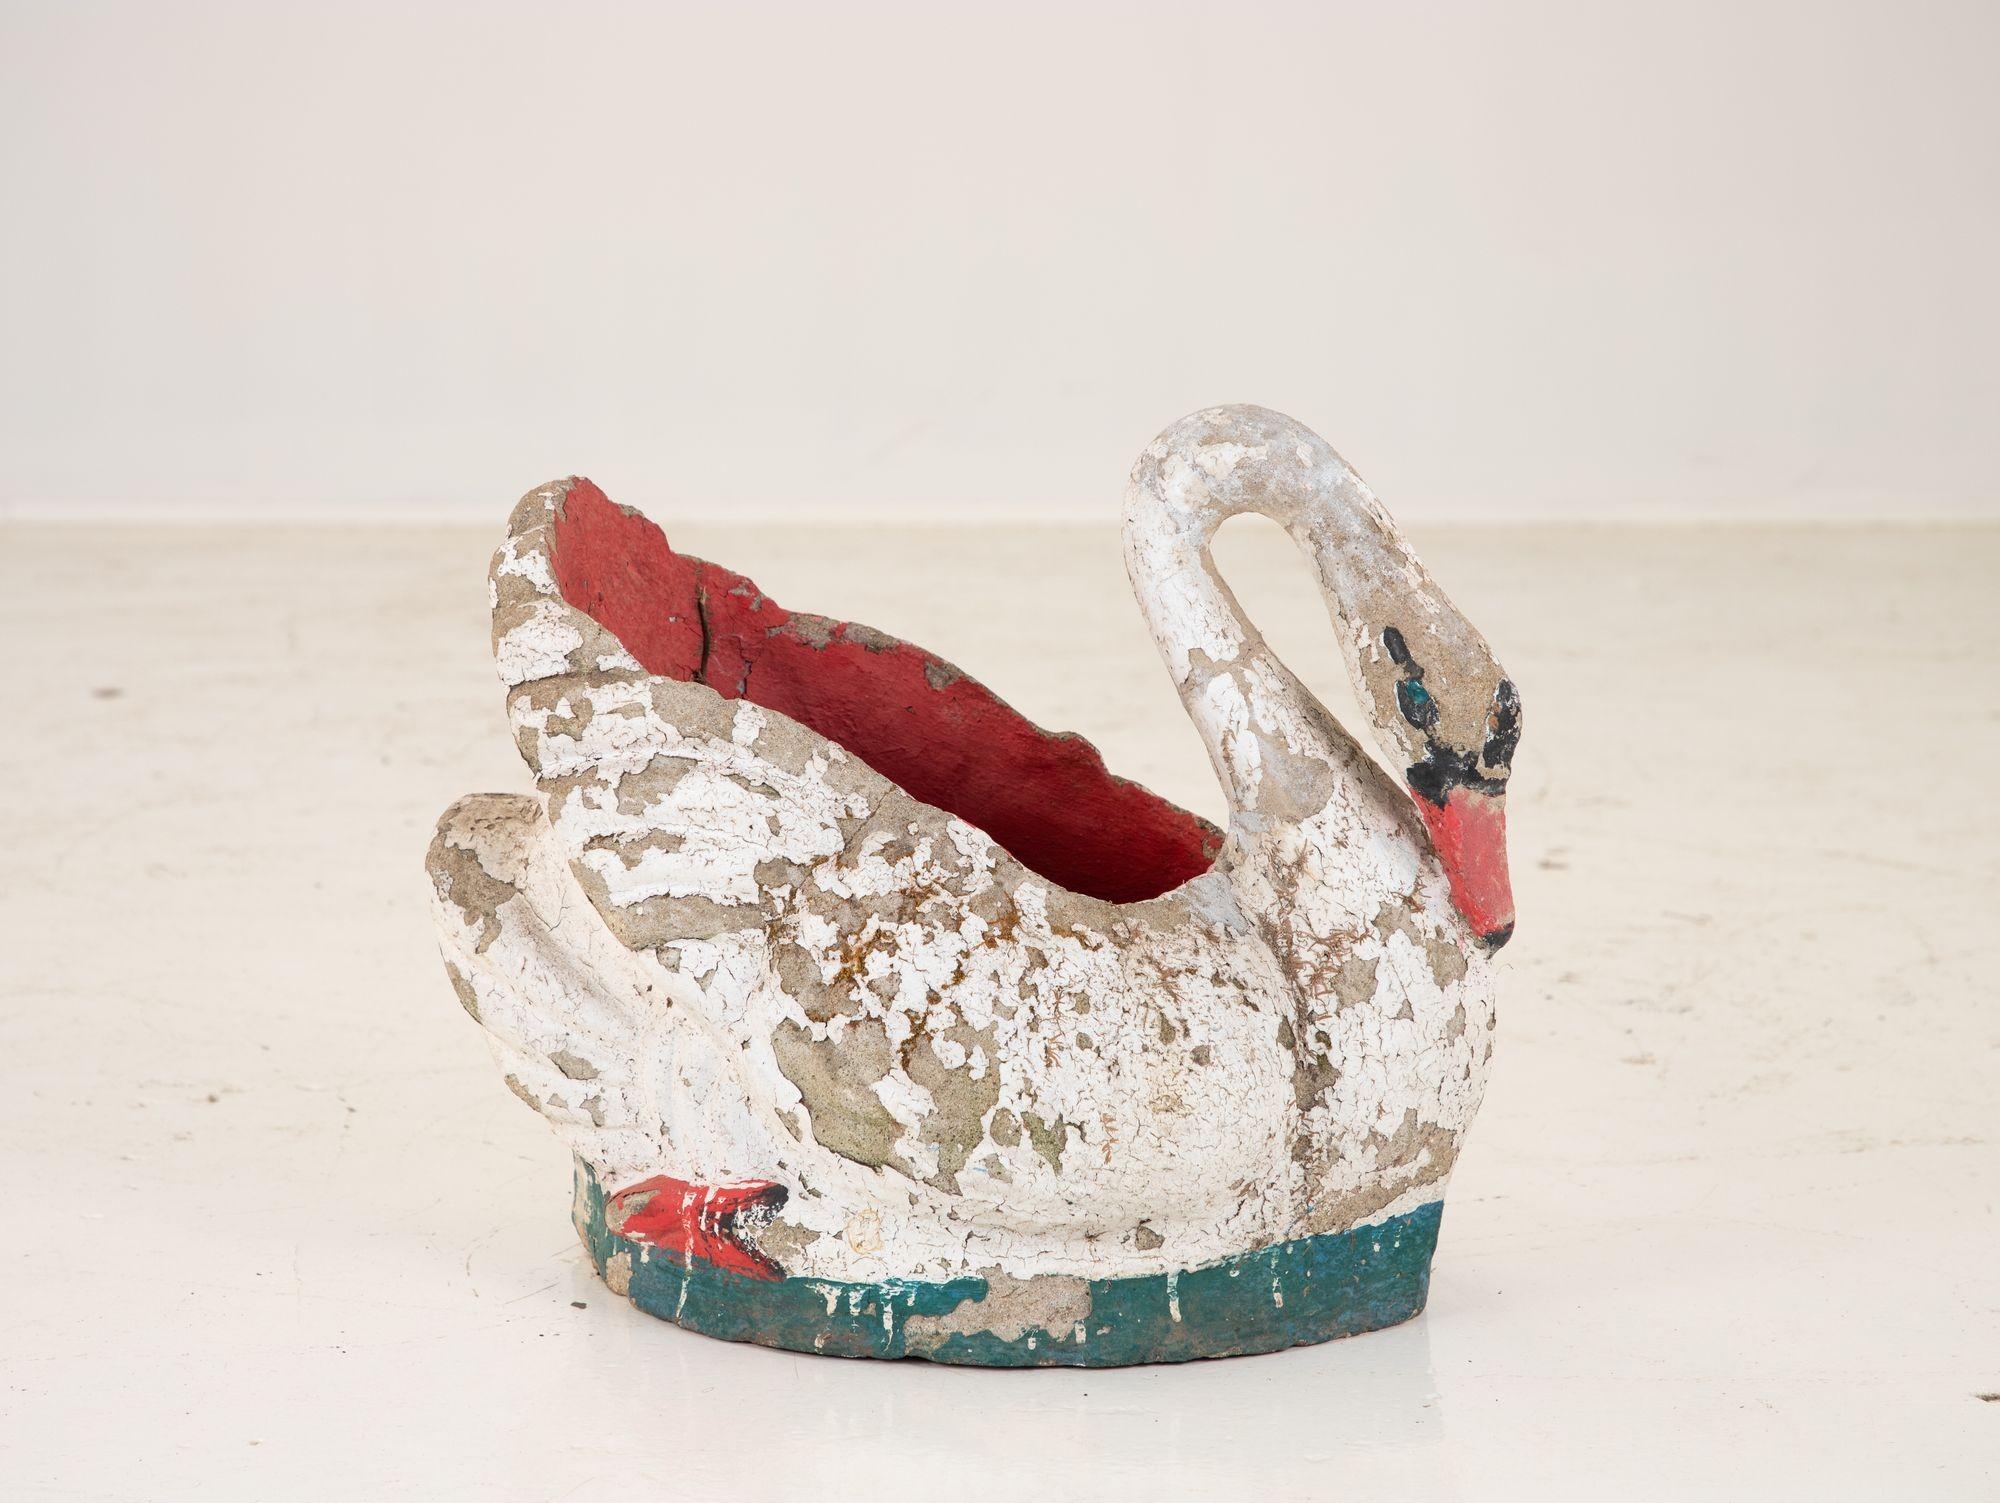 Mid 20th century French painted stone swan planter. Retaining much of the original paint, the planter is in good condition with wear consistent with age and use.